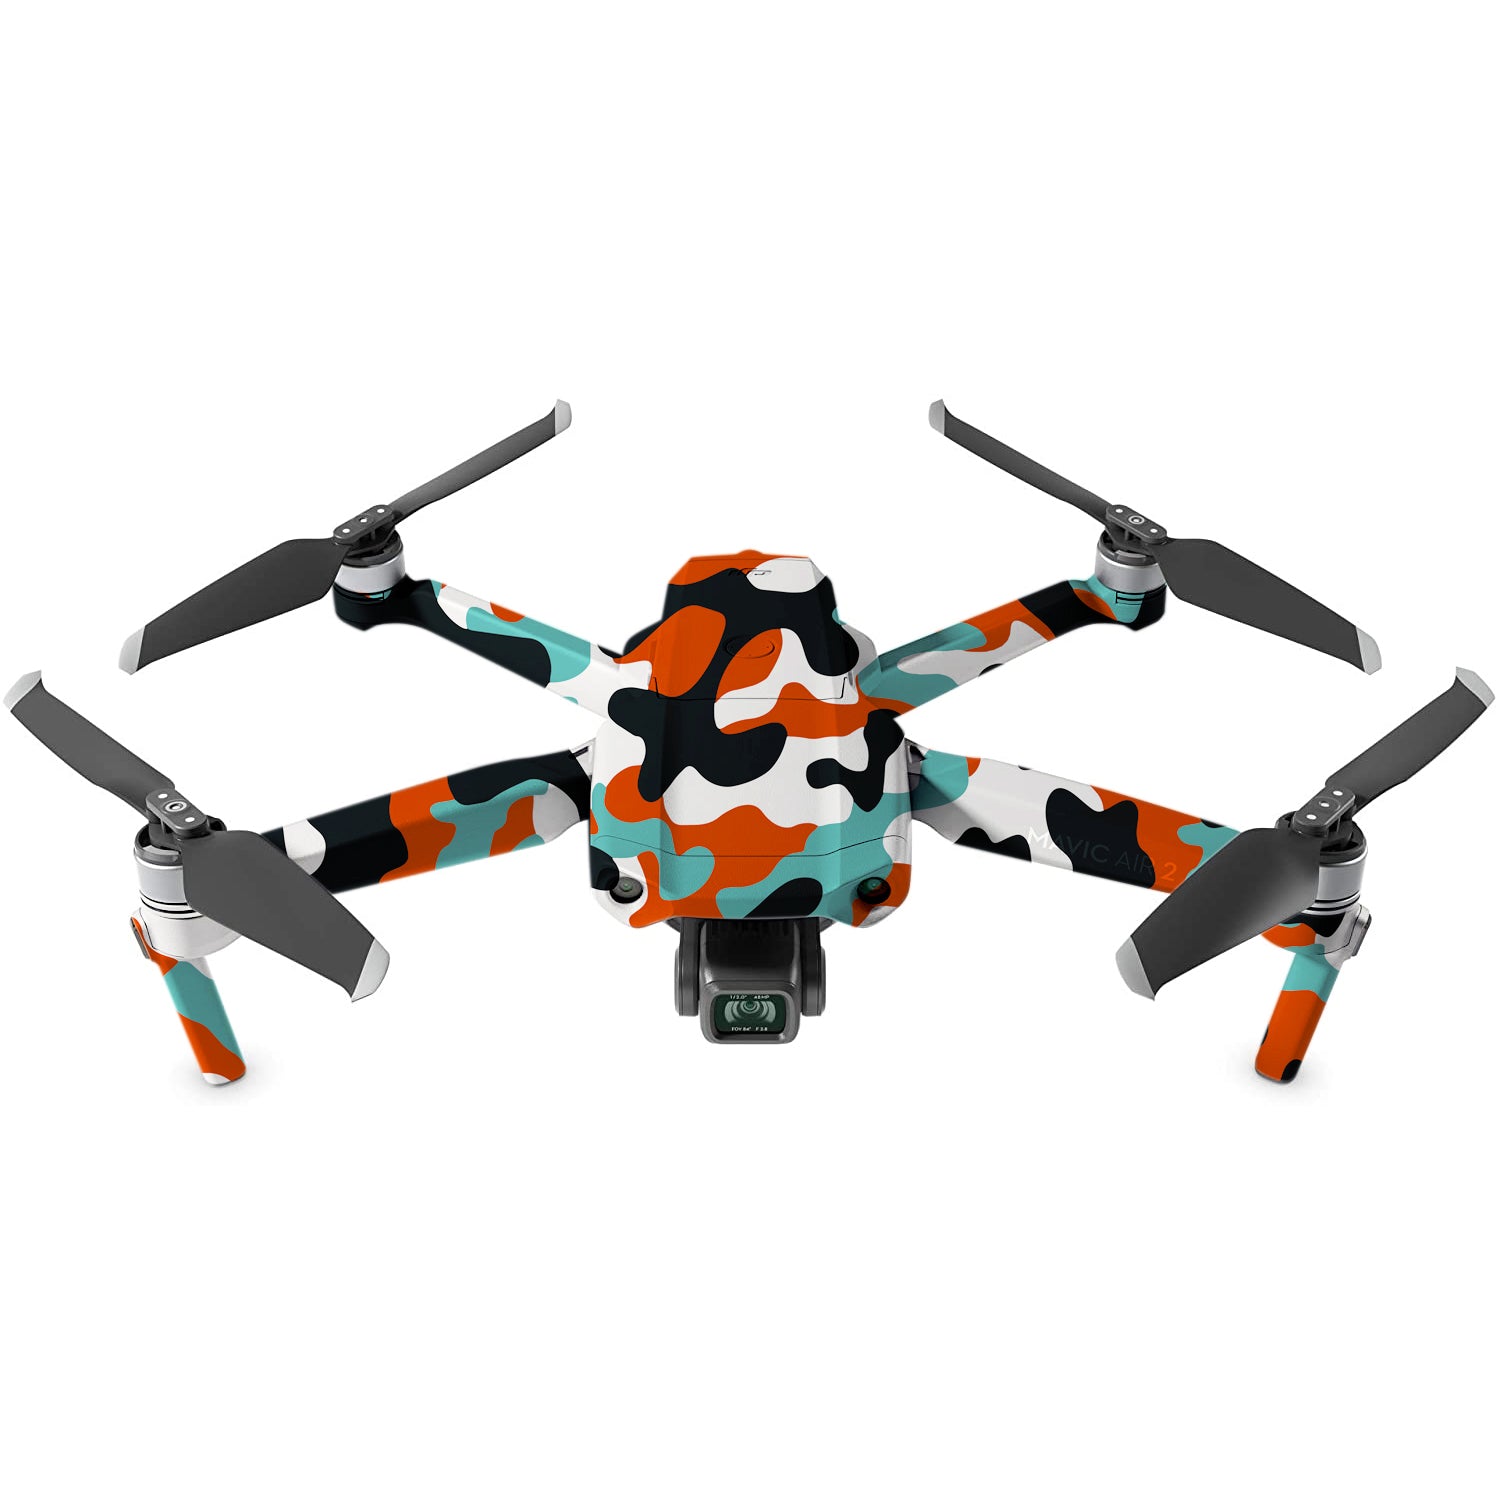 Drone Skins: What Are They?